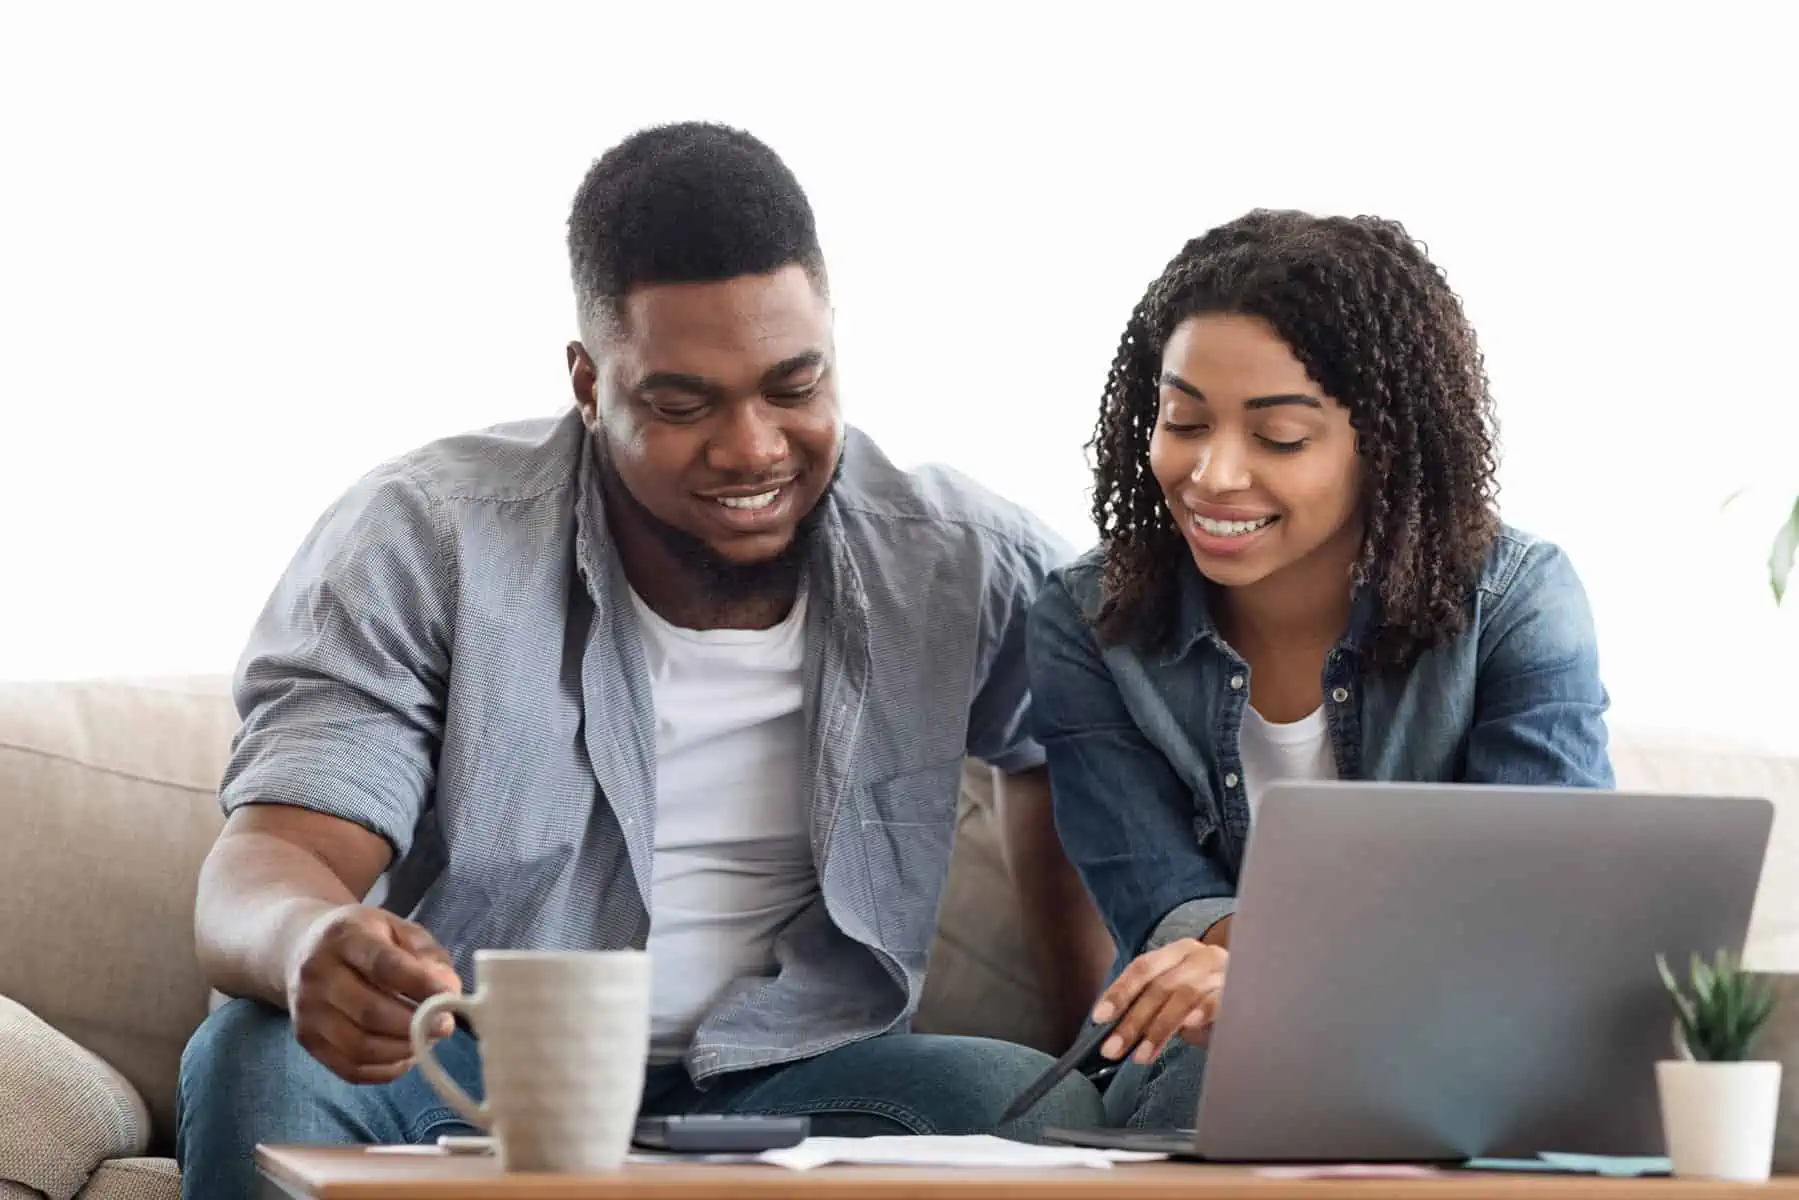 A man and woman sitting on a couch looking at a laptop